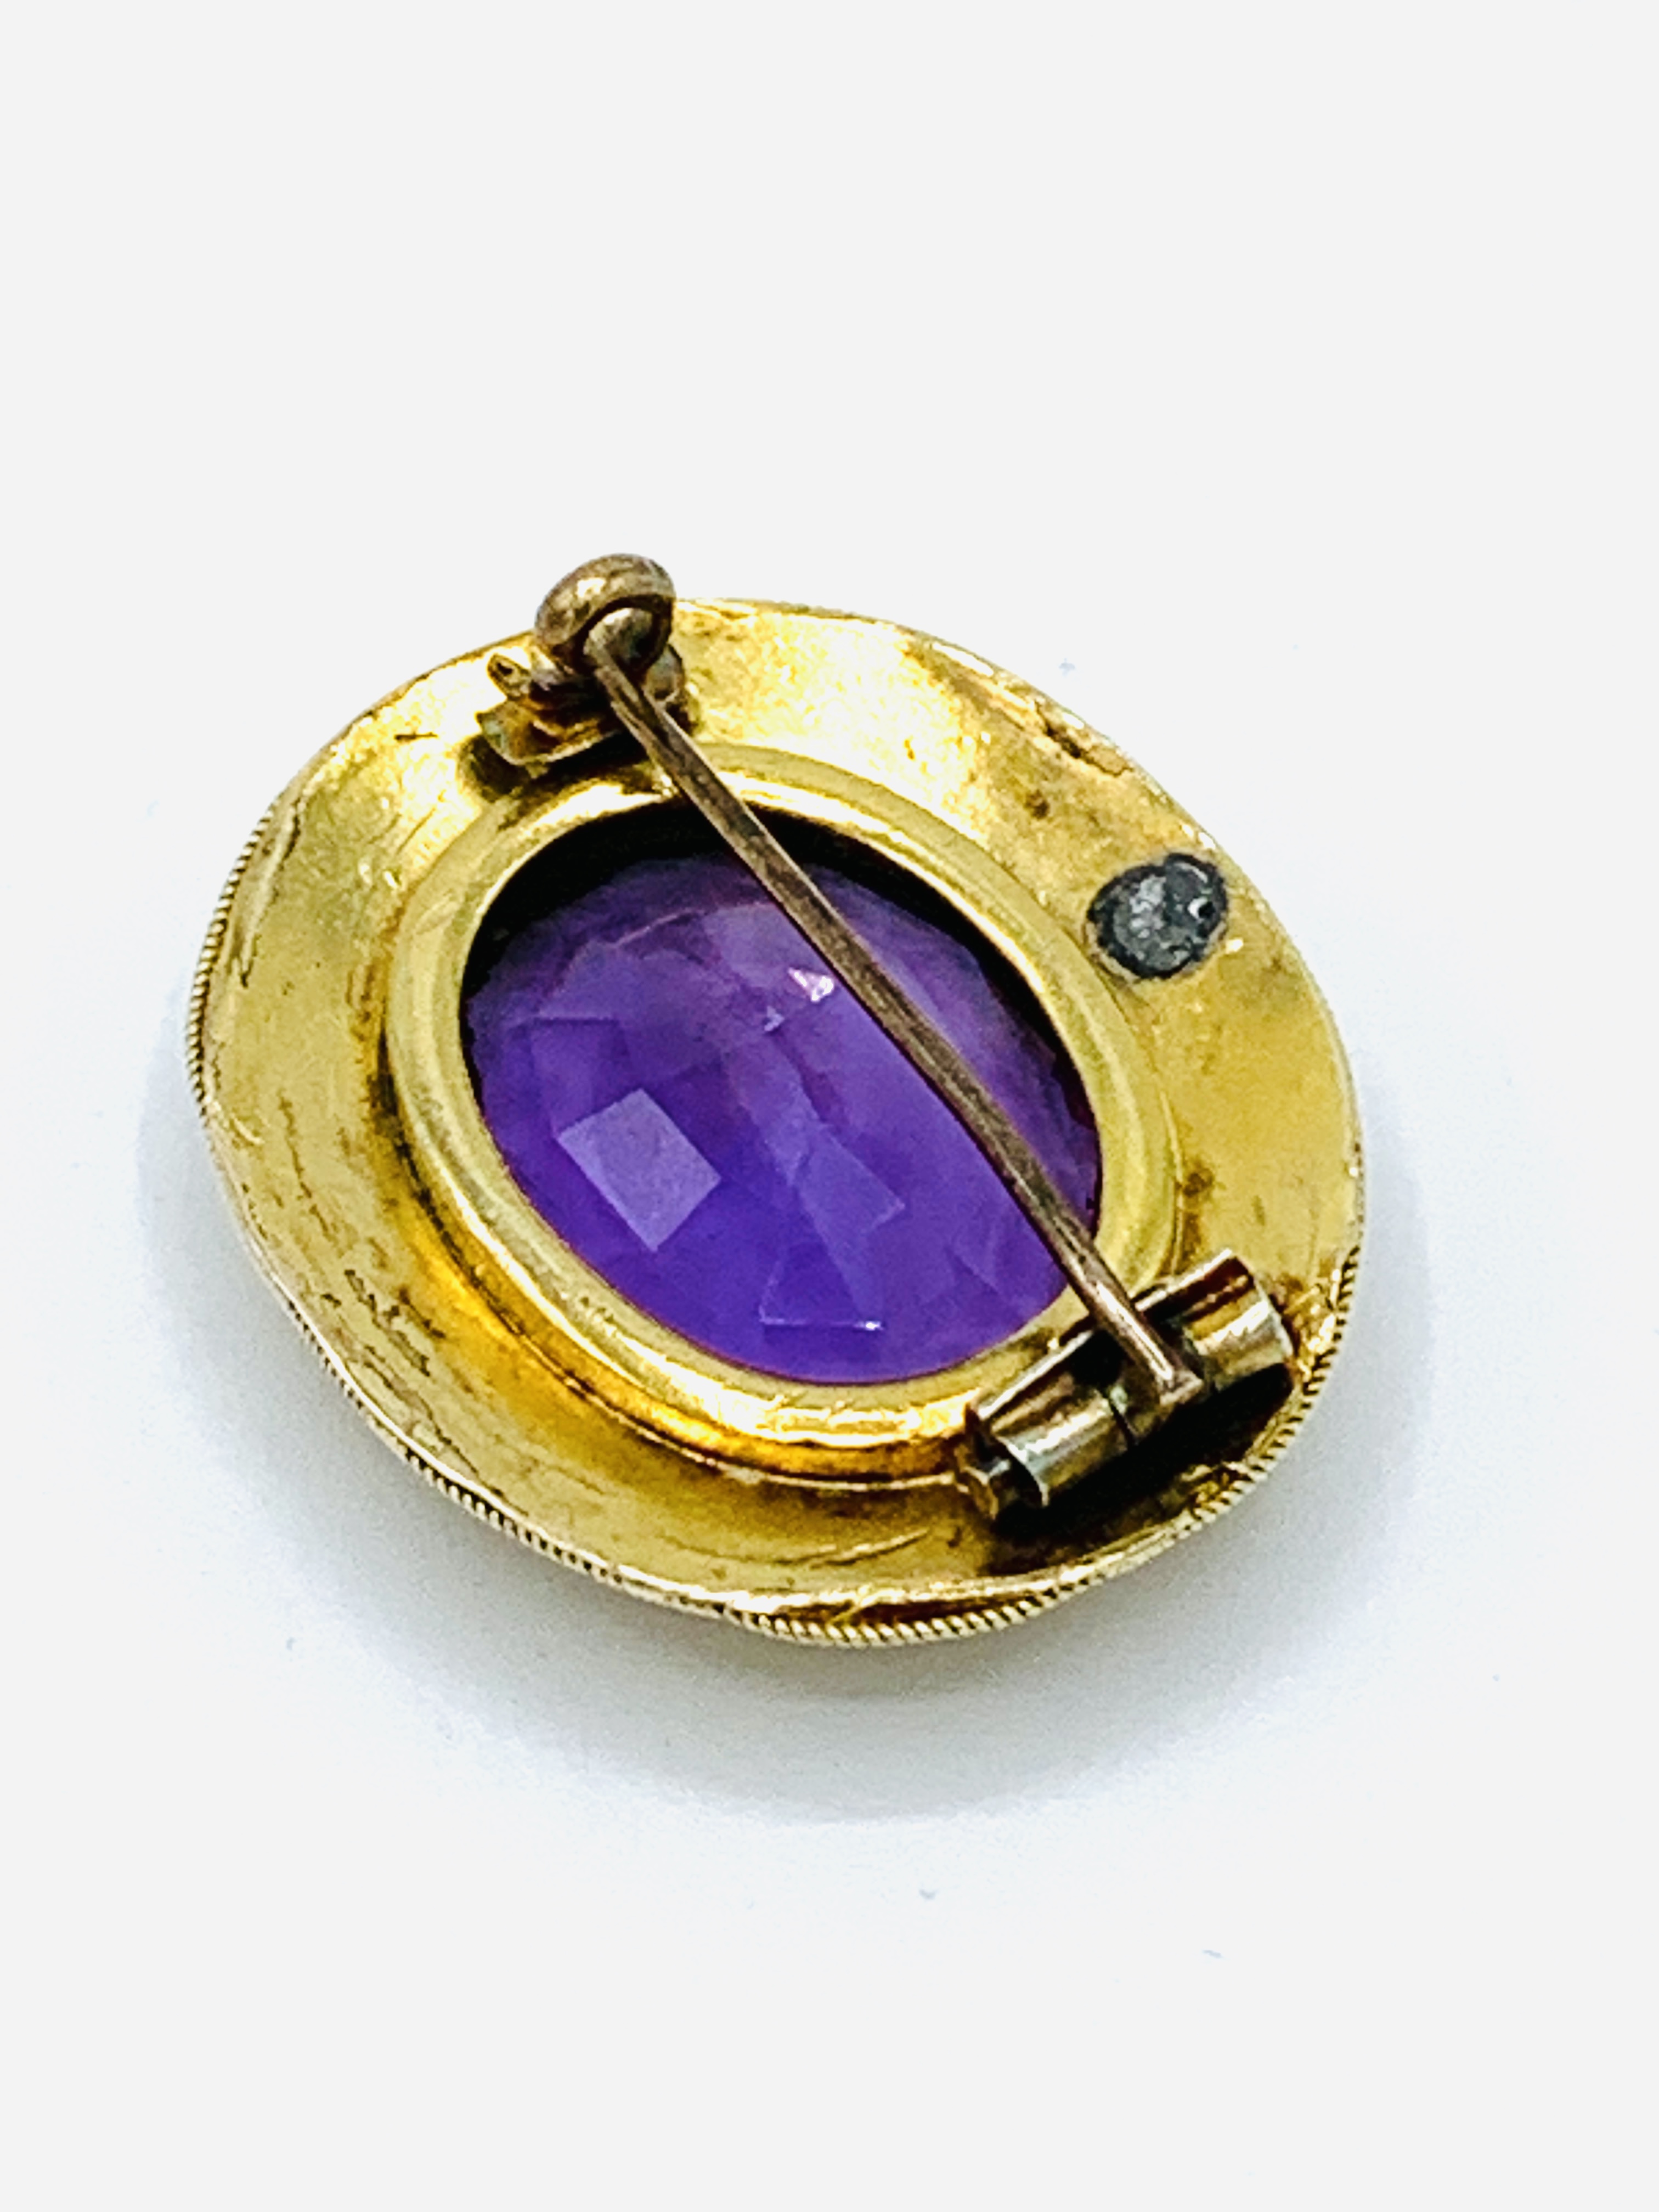 Late 19th century 14ct gold mounted amethyst brooch. - Image 3 of 3